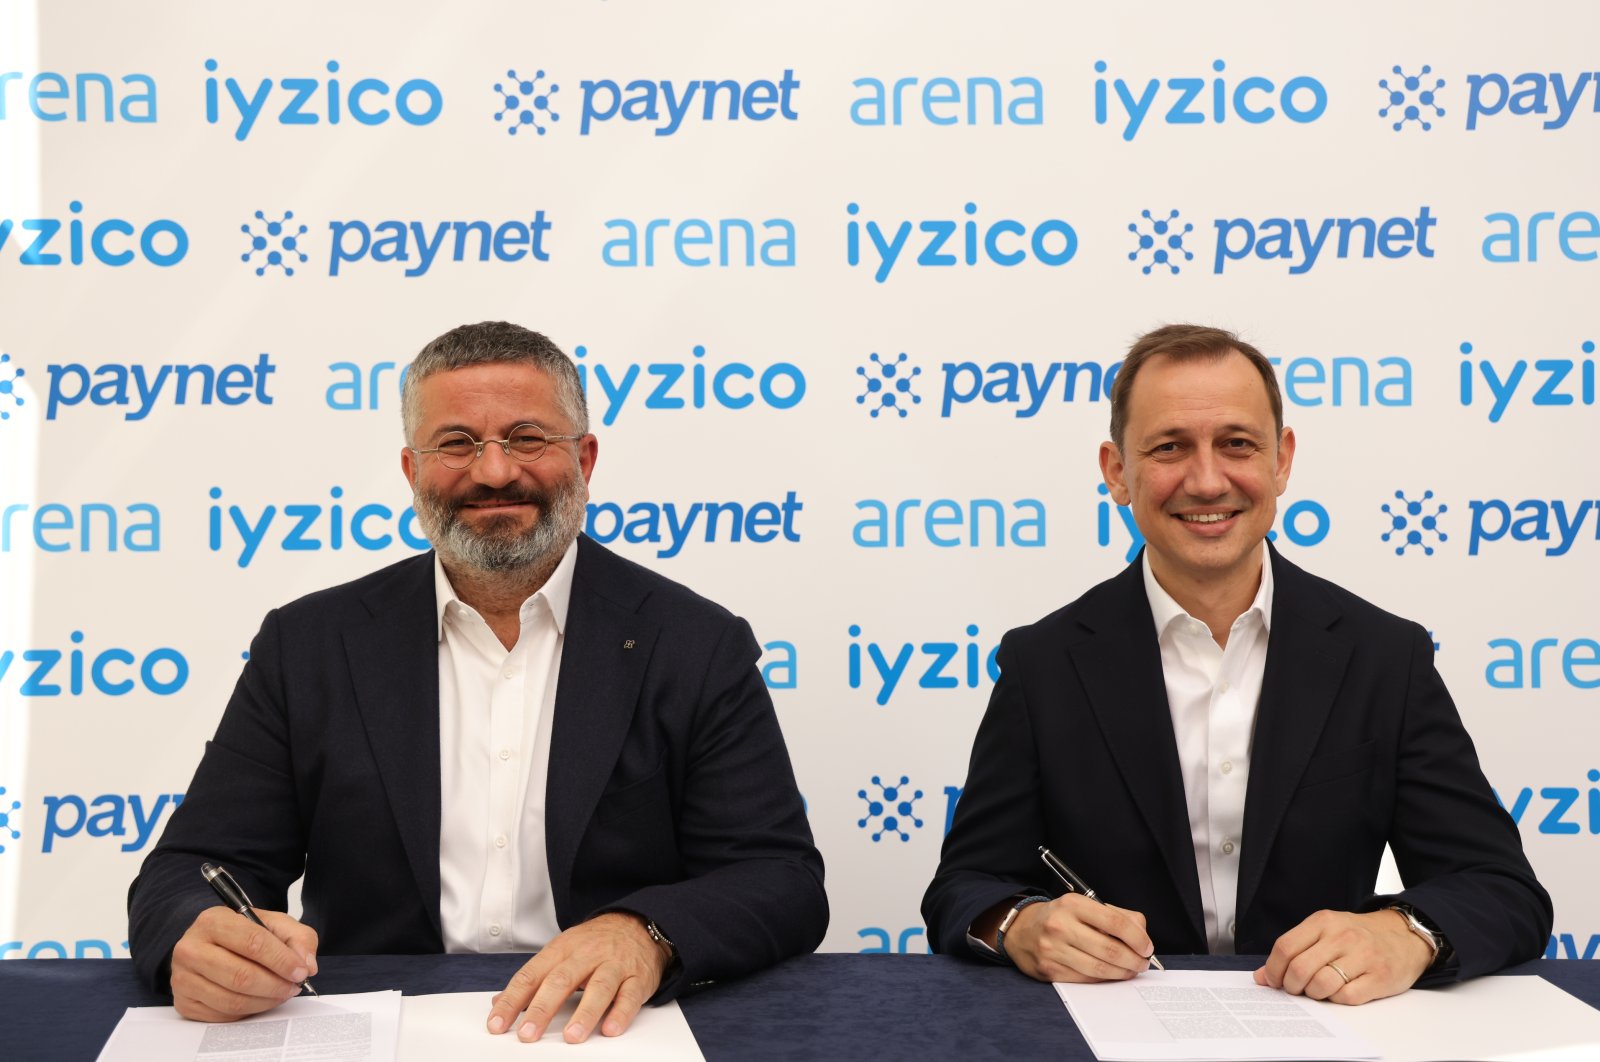 Orkun Saitoğlu (R), CEO of iyzico, signs an agreement with Arena Group CEO Serkan Çelik for the acquisition of Paynet. (Courtesy of iyzico)